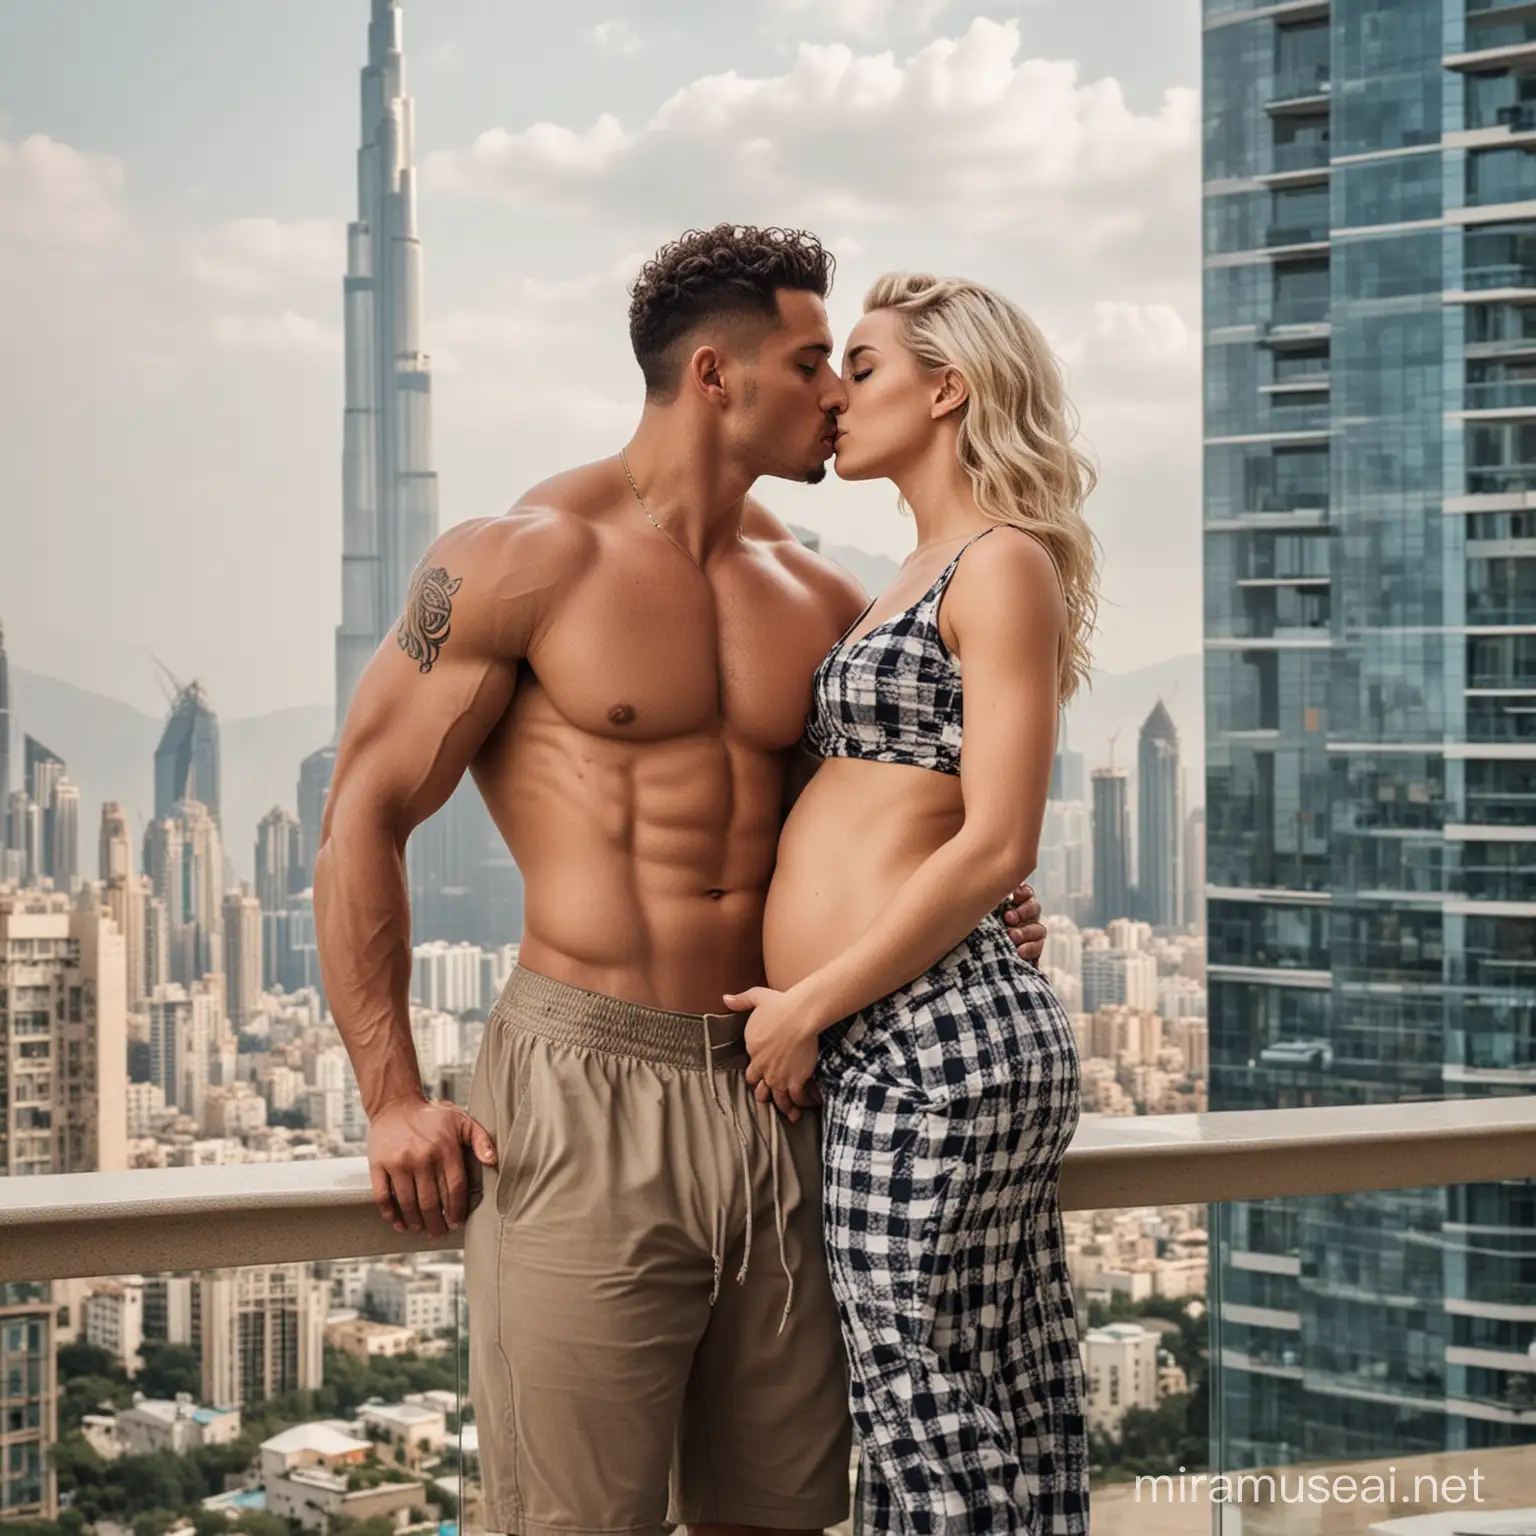 Talented Footballers Romantic Kiss with Pregnant Wife at Luxurious Mountain Villa Overlooking Skyscraper